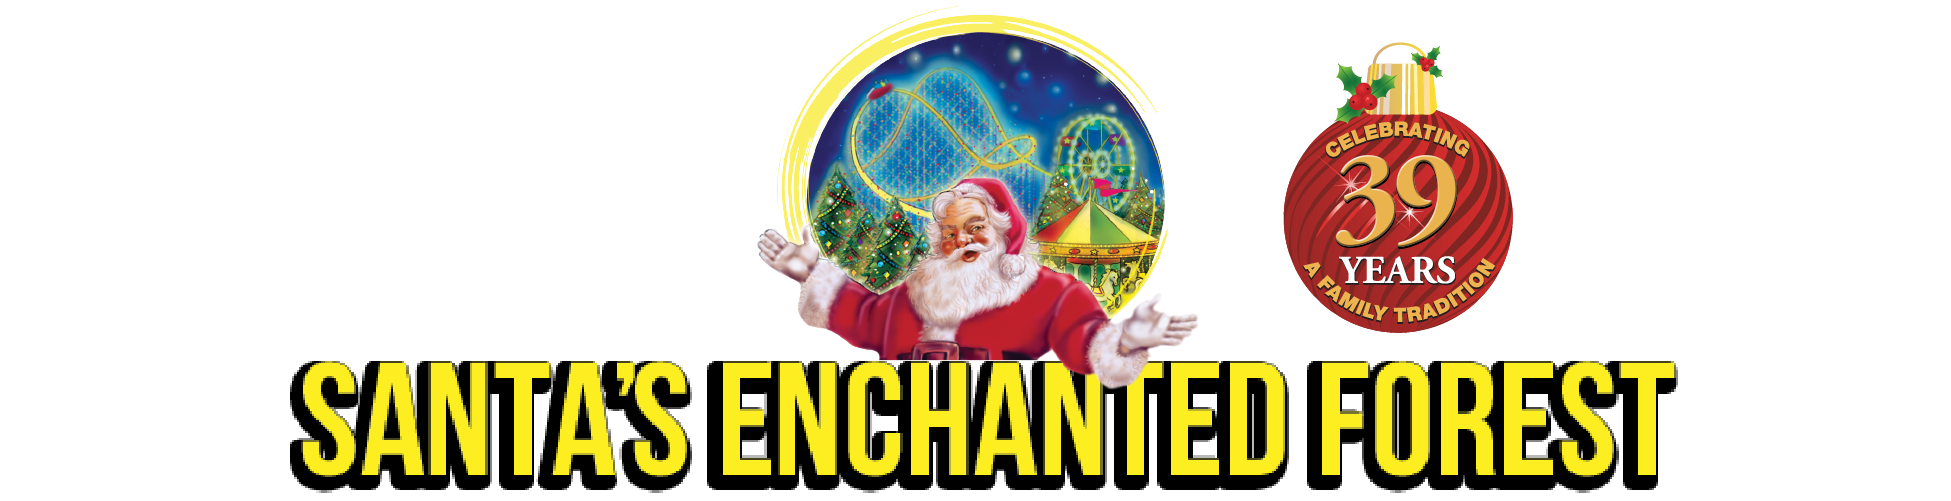 Santa’s Enchanted Forest World’s Largest Holiday Theme Park